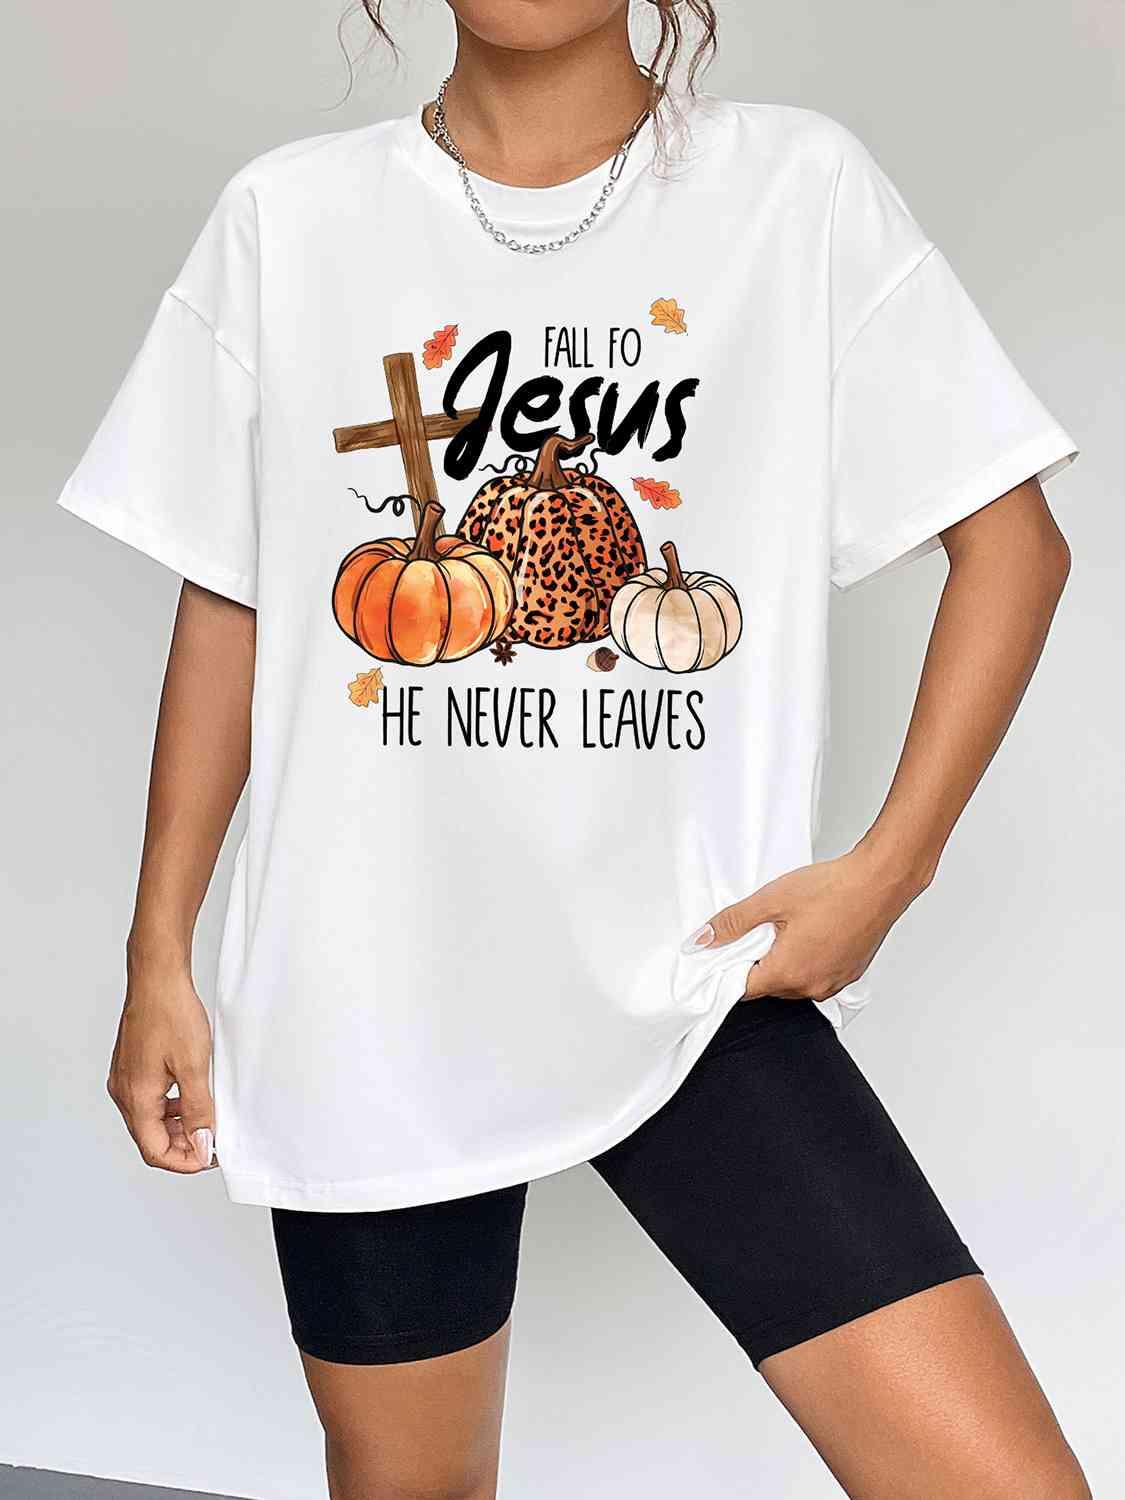 Fall into Jesus Graphic T-Shirt - God's Girl Gifts And Apparel